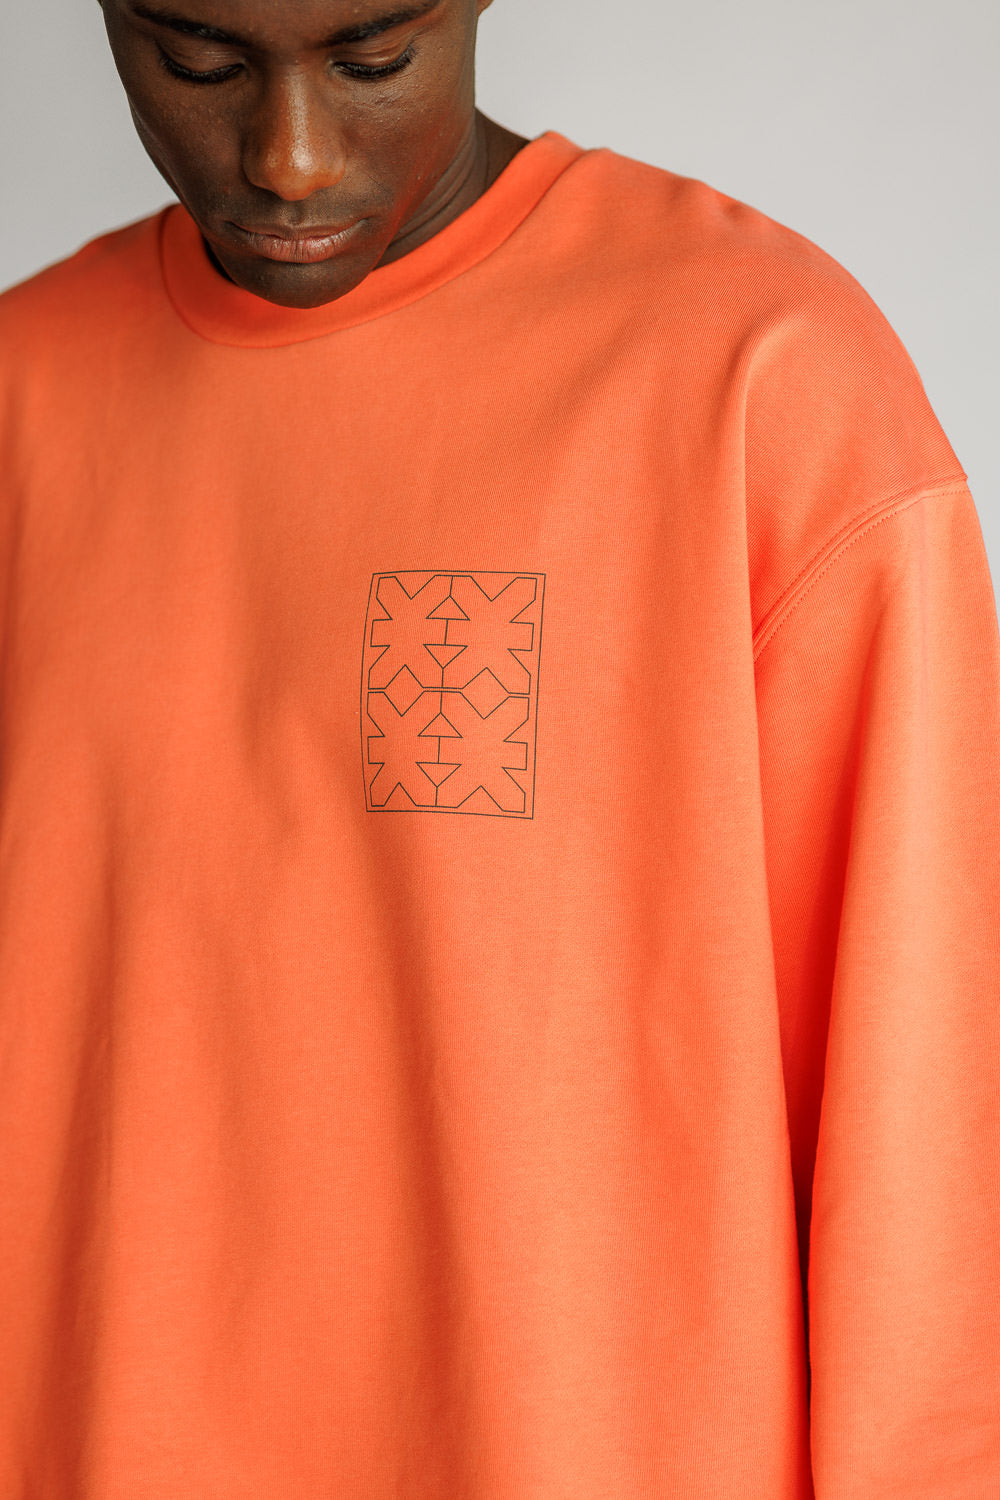 Sweater Coral